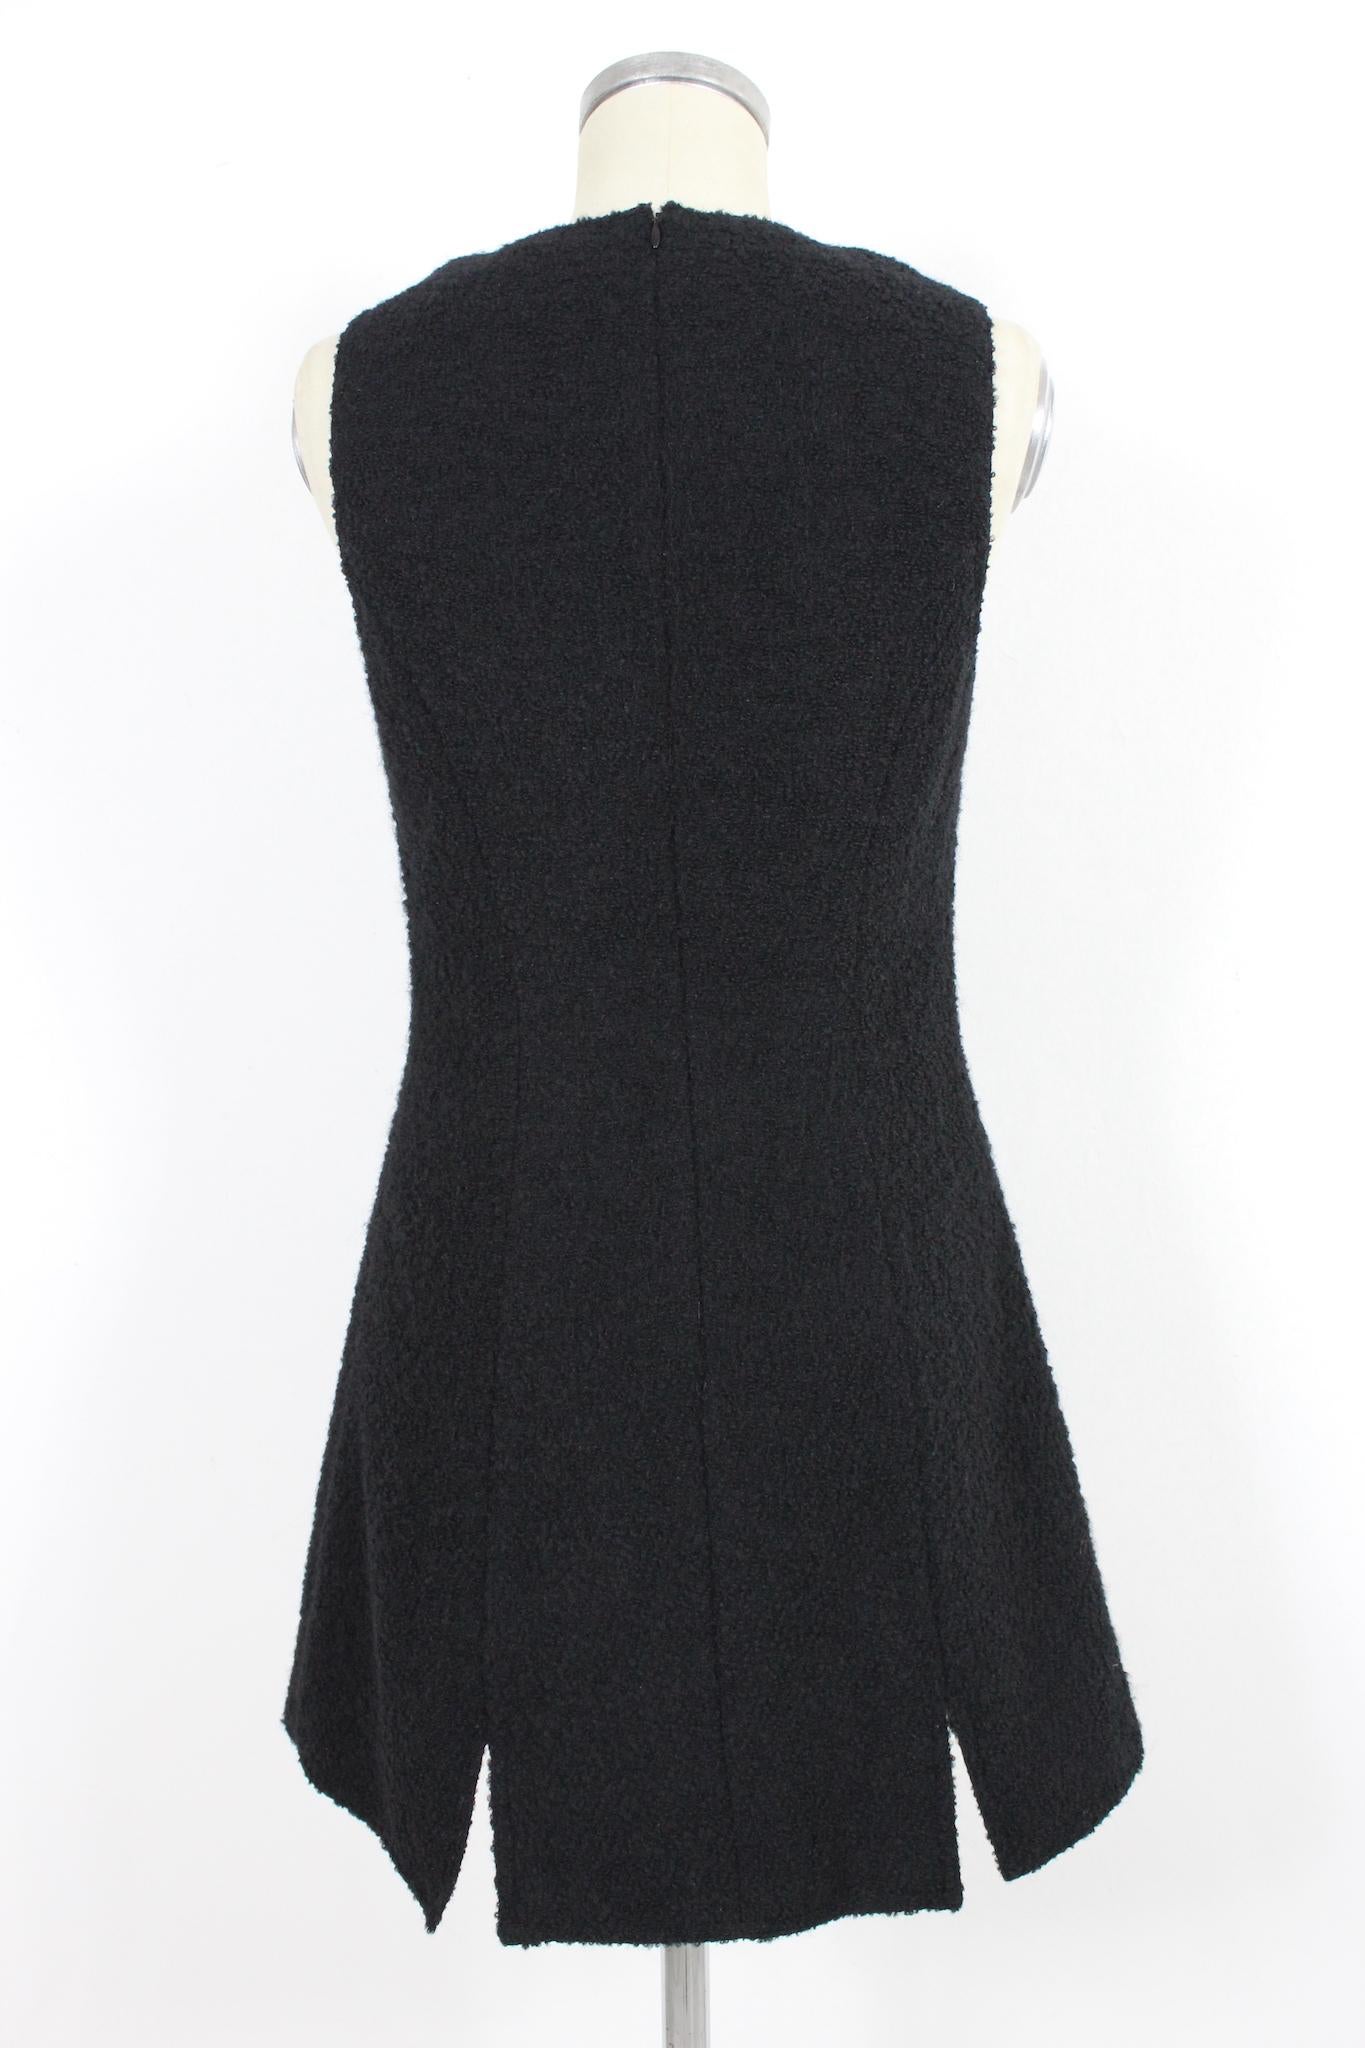 Versace 90s vintage little black dress. Flared evening dress, sleeveless, zip closure on the back. 80% wool, 20% polyamide fabric, internally lined. Slits at the bottom. Made in Italy.

Size: 44 It 10 Us 12 Uk

Shoulder: 32cm
Bust/Chest: 44cm
Waist: